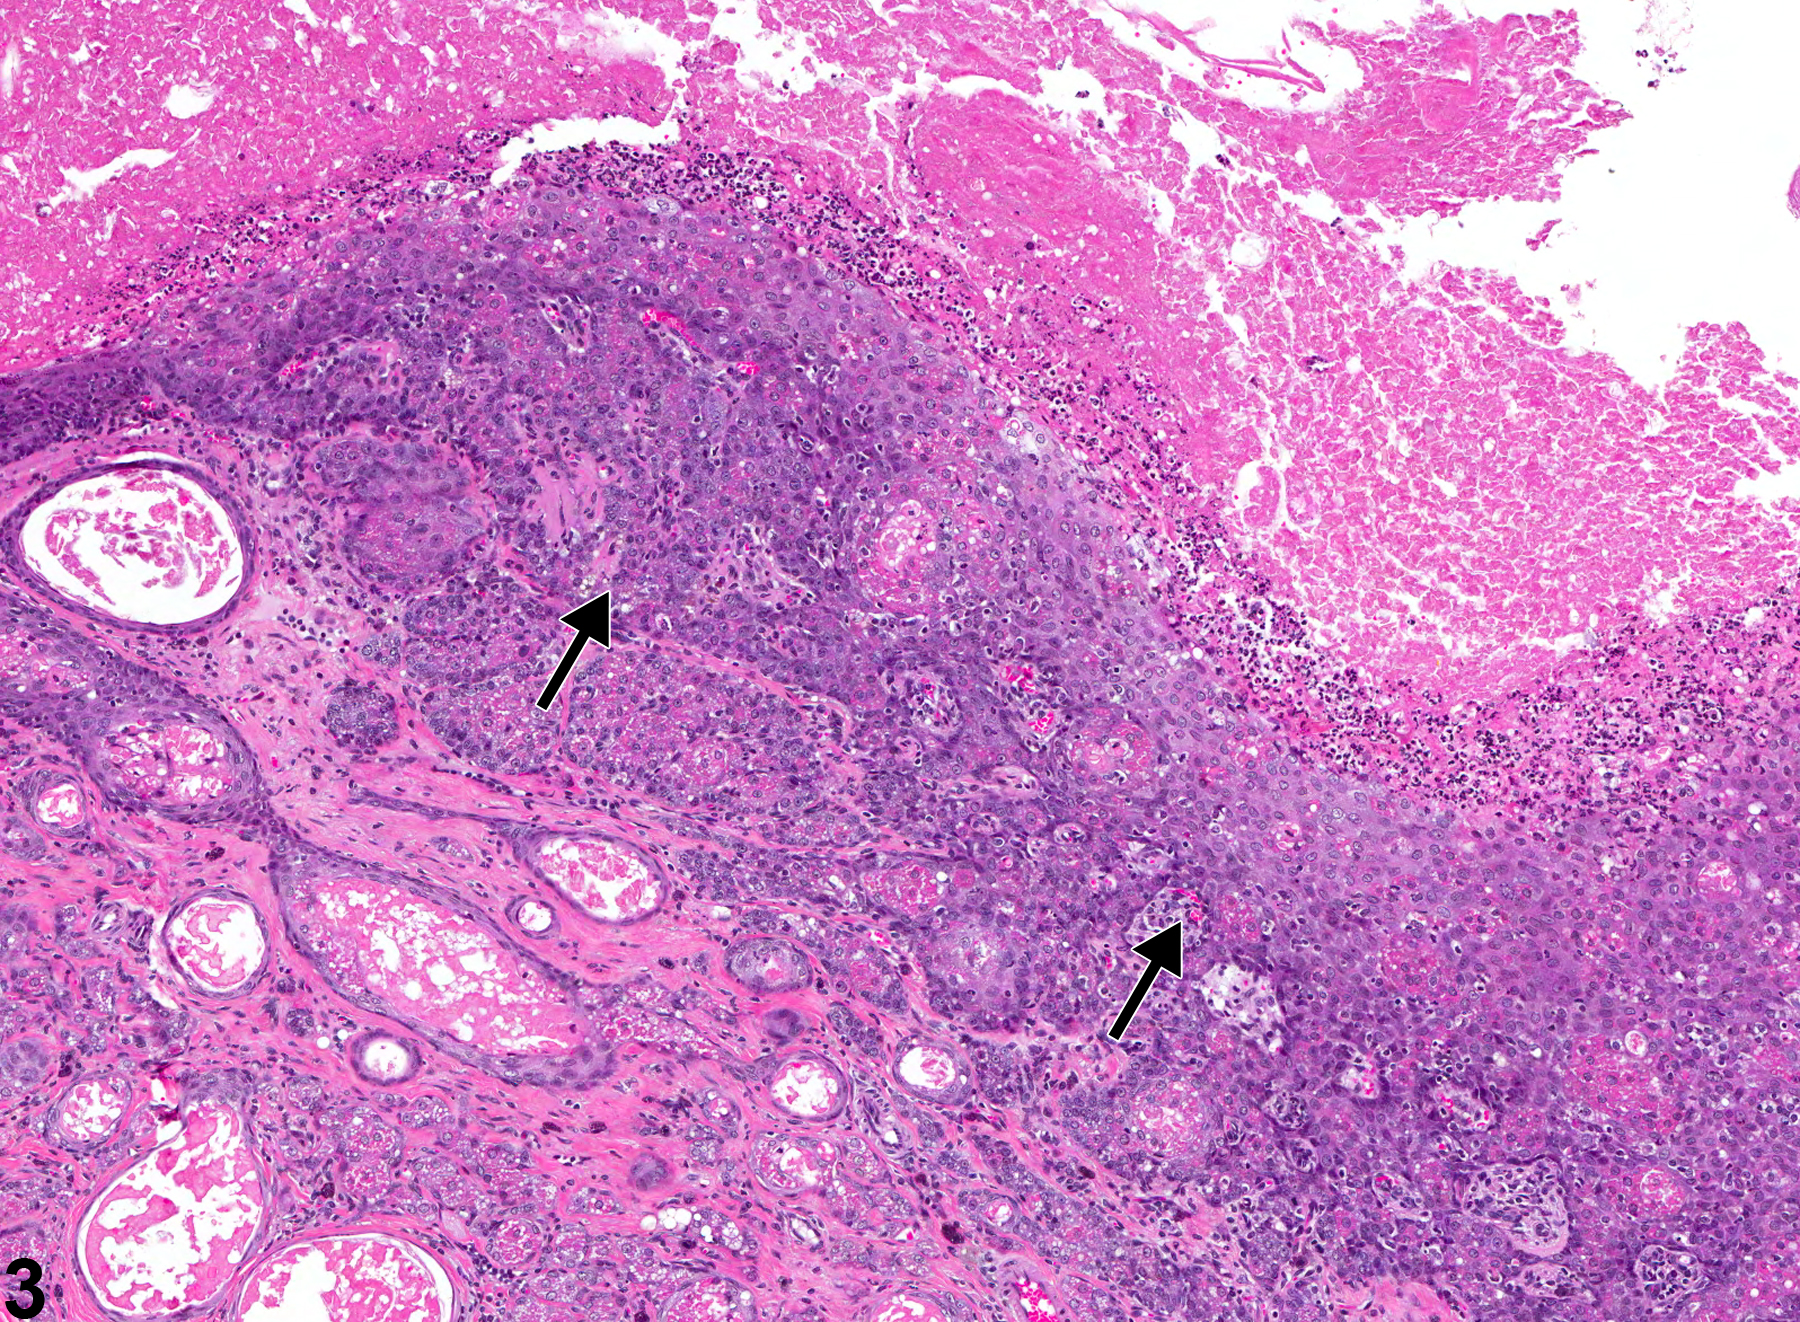 Image of epithelial hyperplasia in the preputial gland from a male F344/N rat in a chronic study